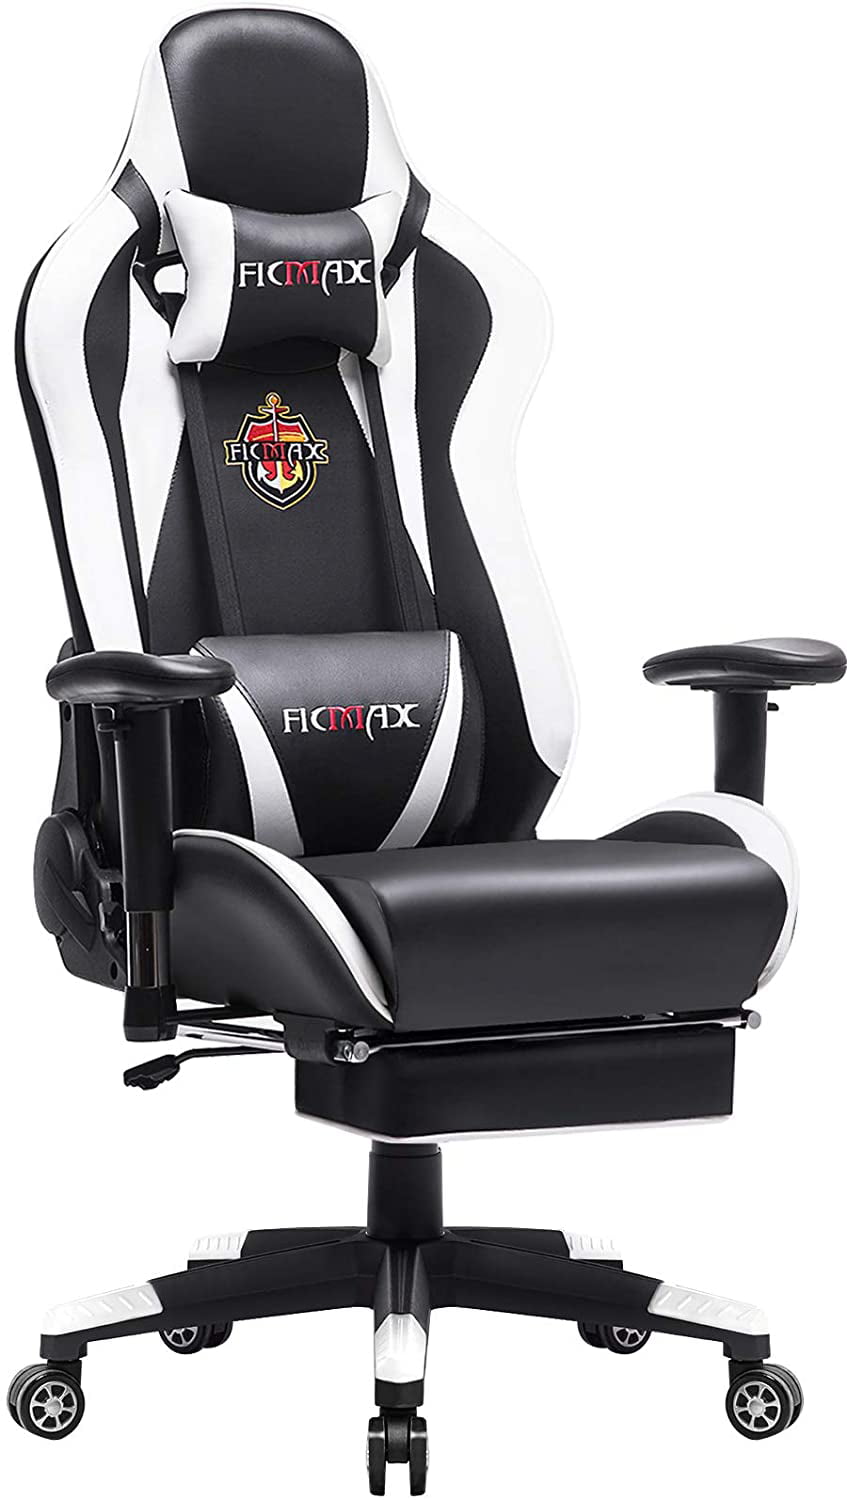 Details about   Gaming Chair Racing Recliner High-back Office Computer Desk Seat Swivel Footrest 